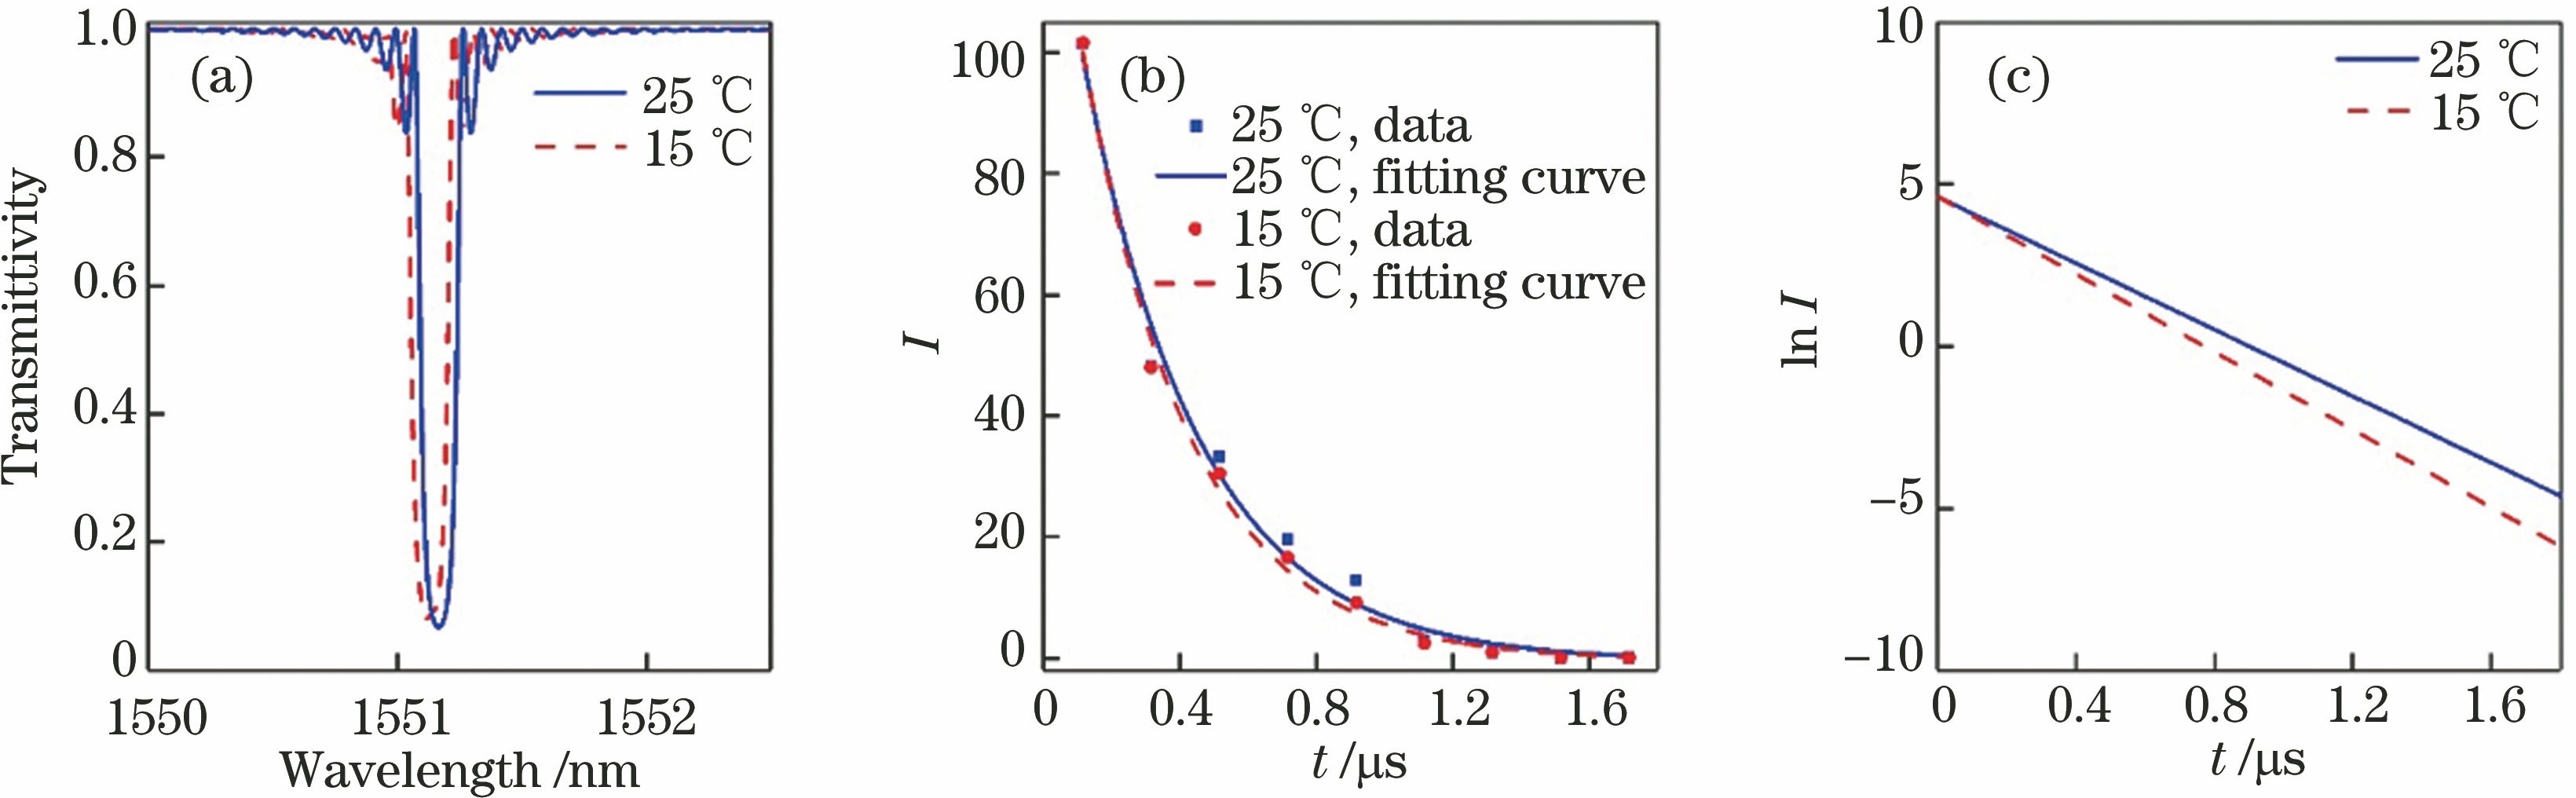 Simulated results of FBG loop ring-down cavity with different temperature perturbations. (a) FBG spectral response; (b) exponential decay curve of intensity; (c) logarithm curve of intensity